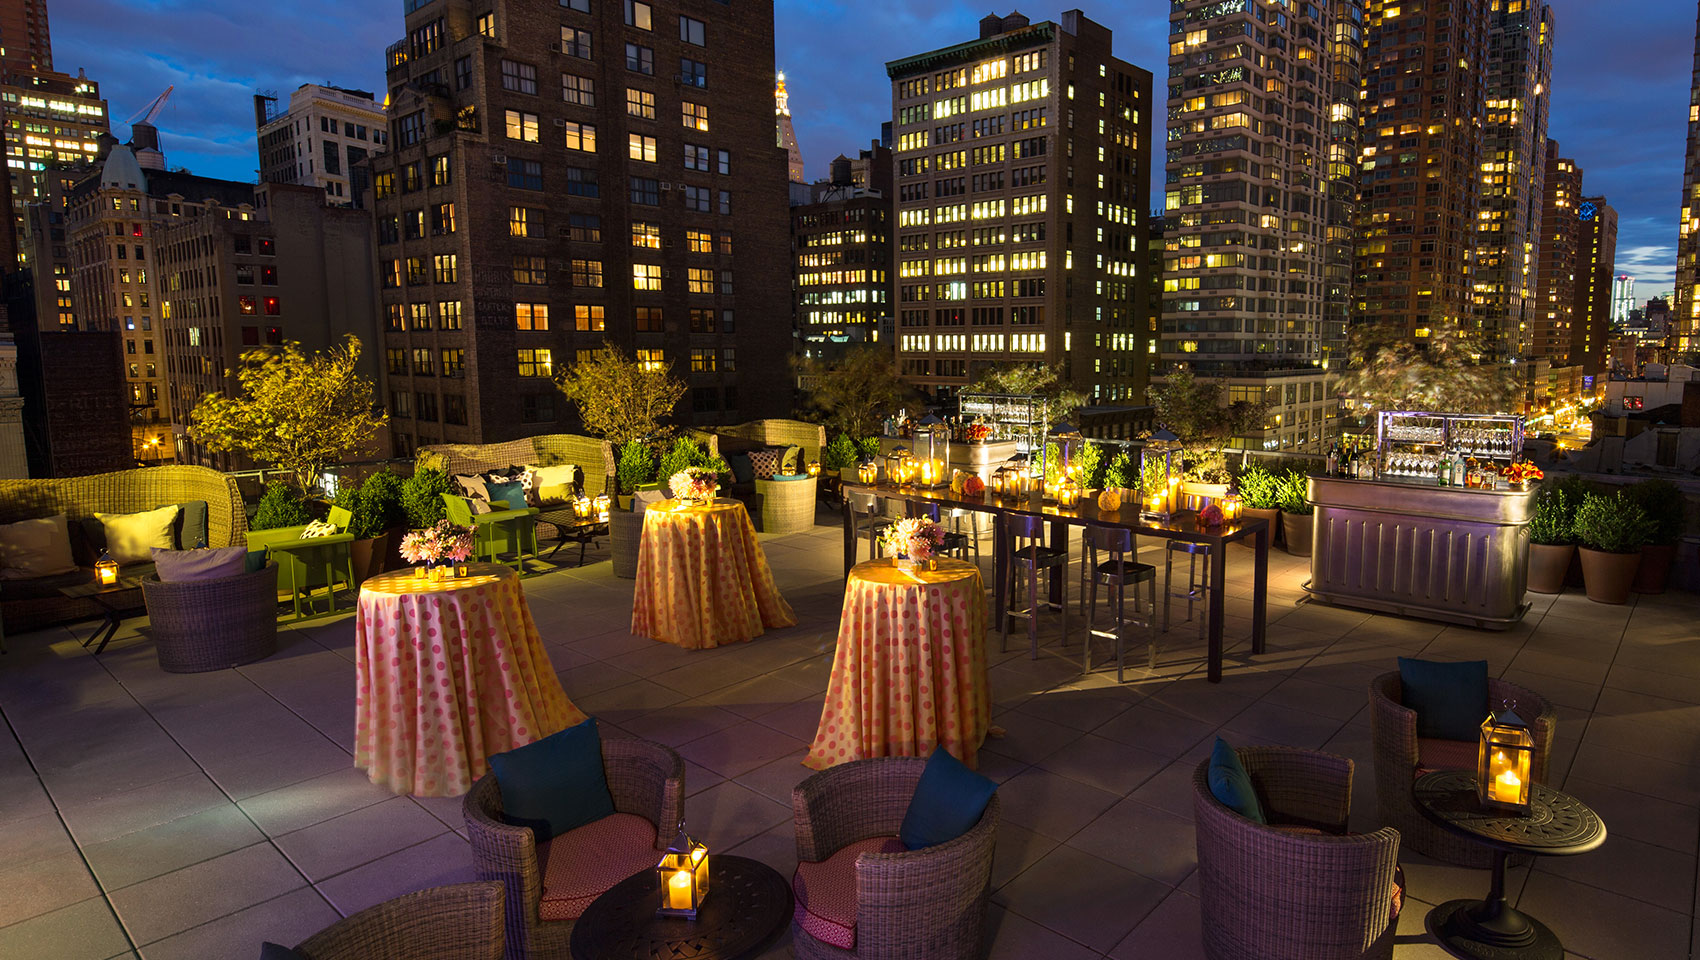 Kimpton Hotel Eventi Veranda set up for outdoor event with tables and bar against city building views at night